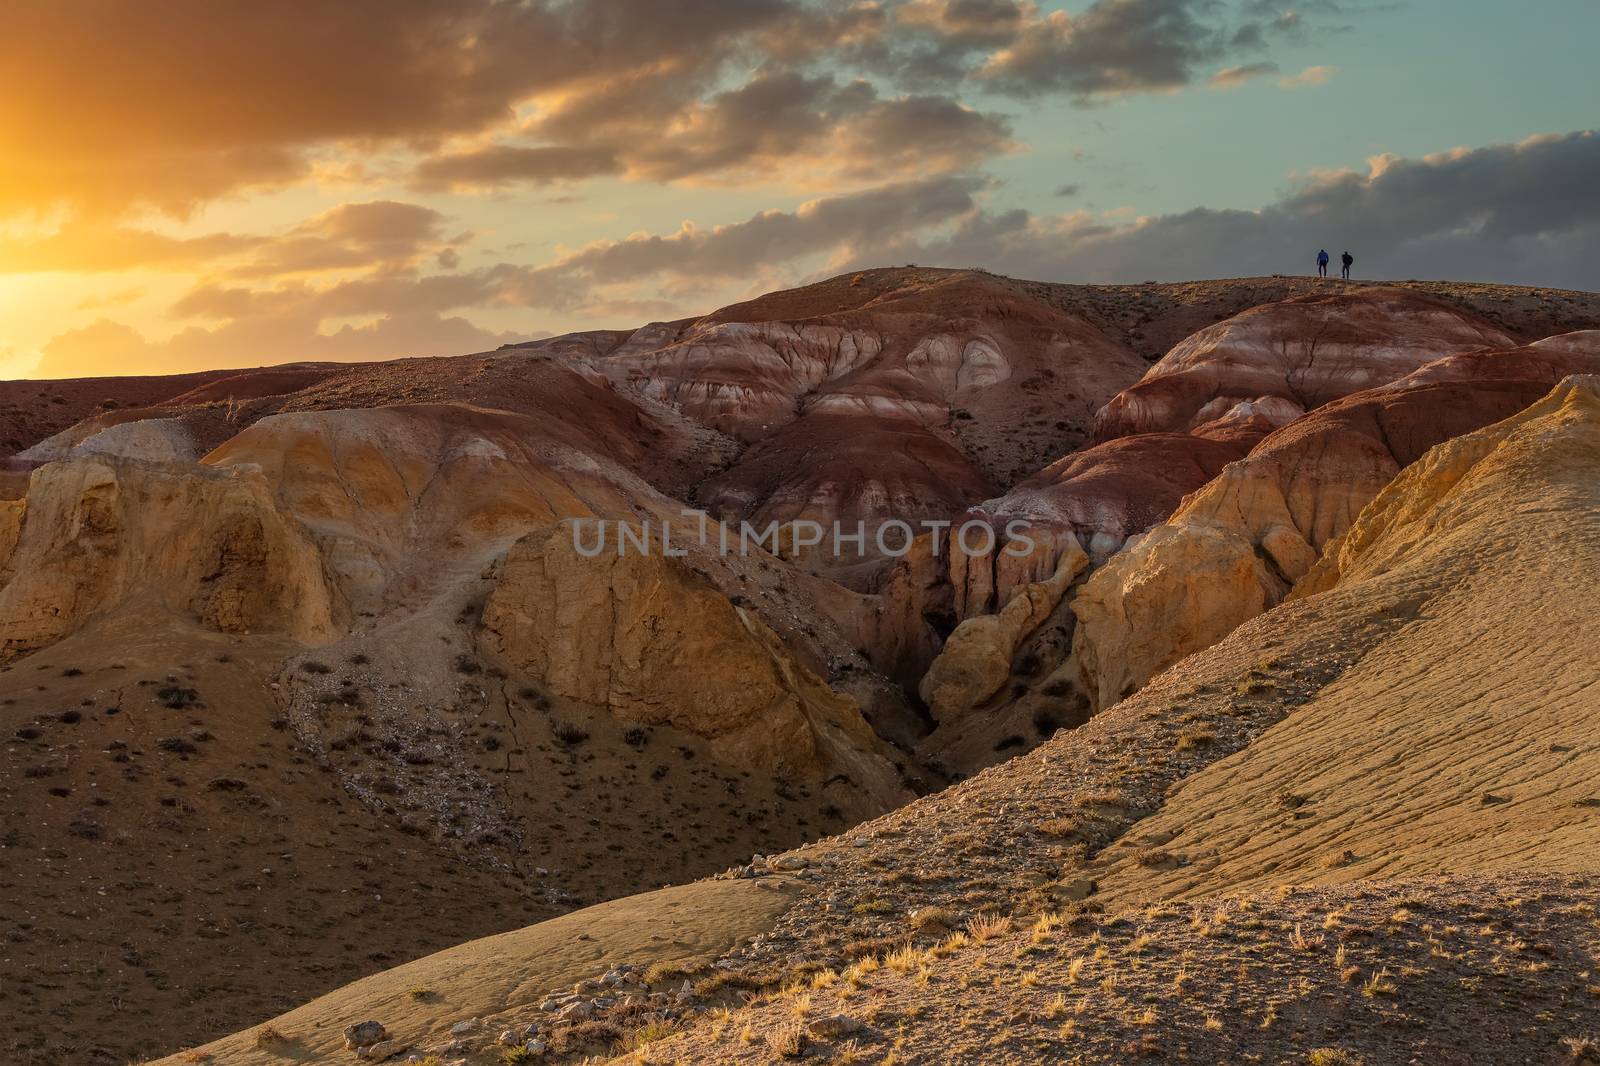 Beautiful low angle shot of two tiny human figures climbing massive red mountain in Kyzyl-Chin valley, also called Mars valley. Sunset cloudy sky as a backdrop. Golden hour. Altai, Siberia, Russia.